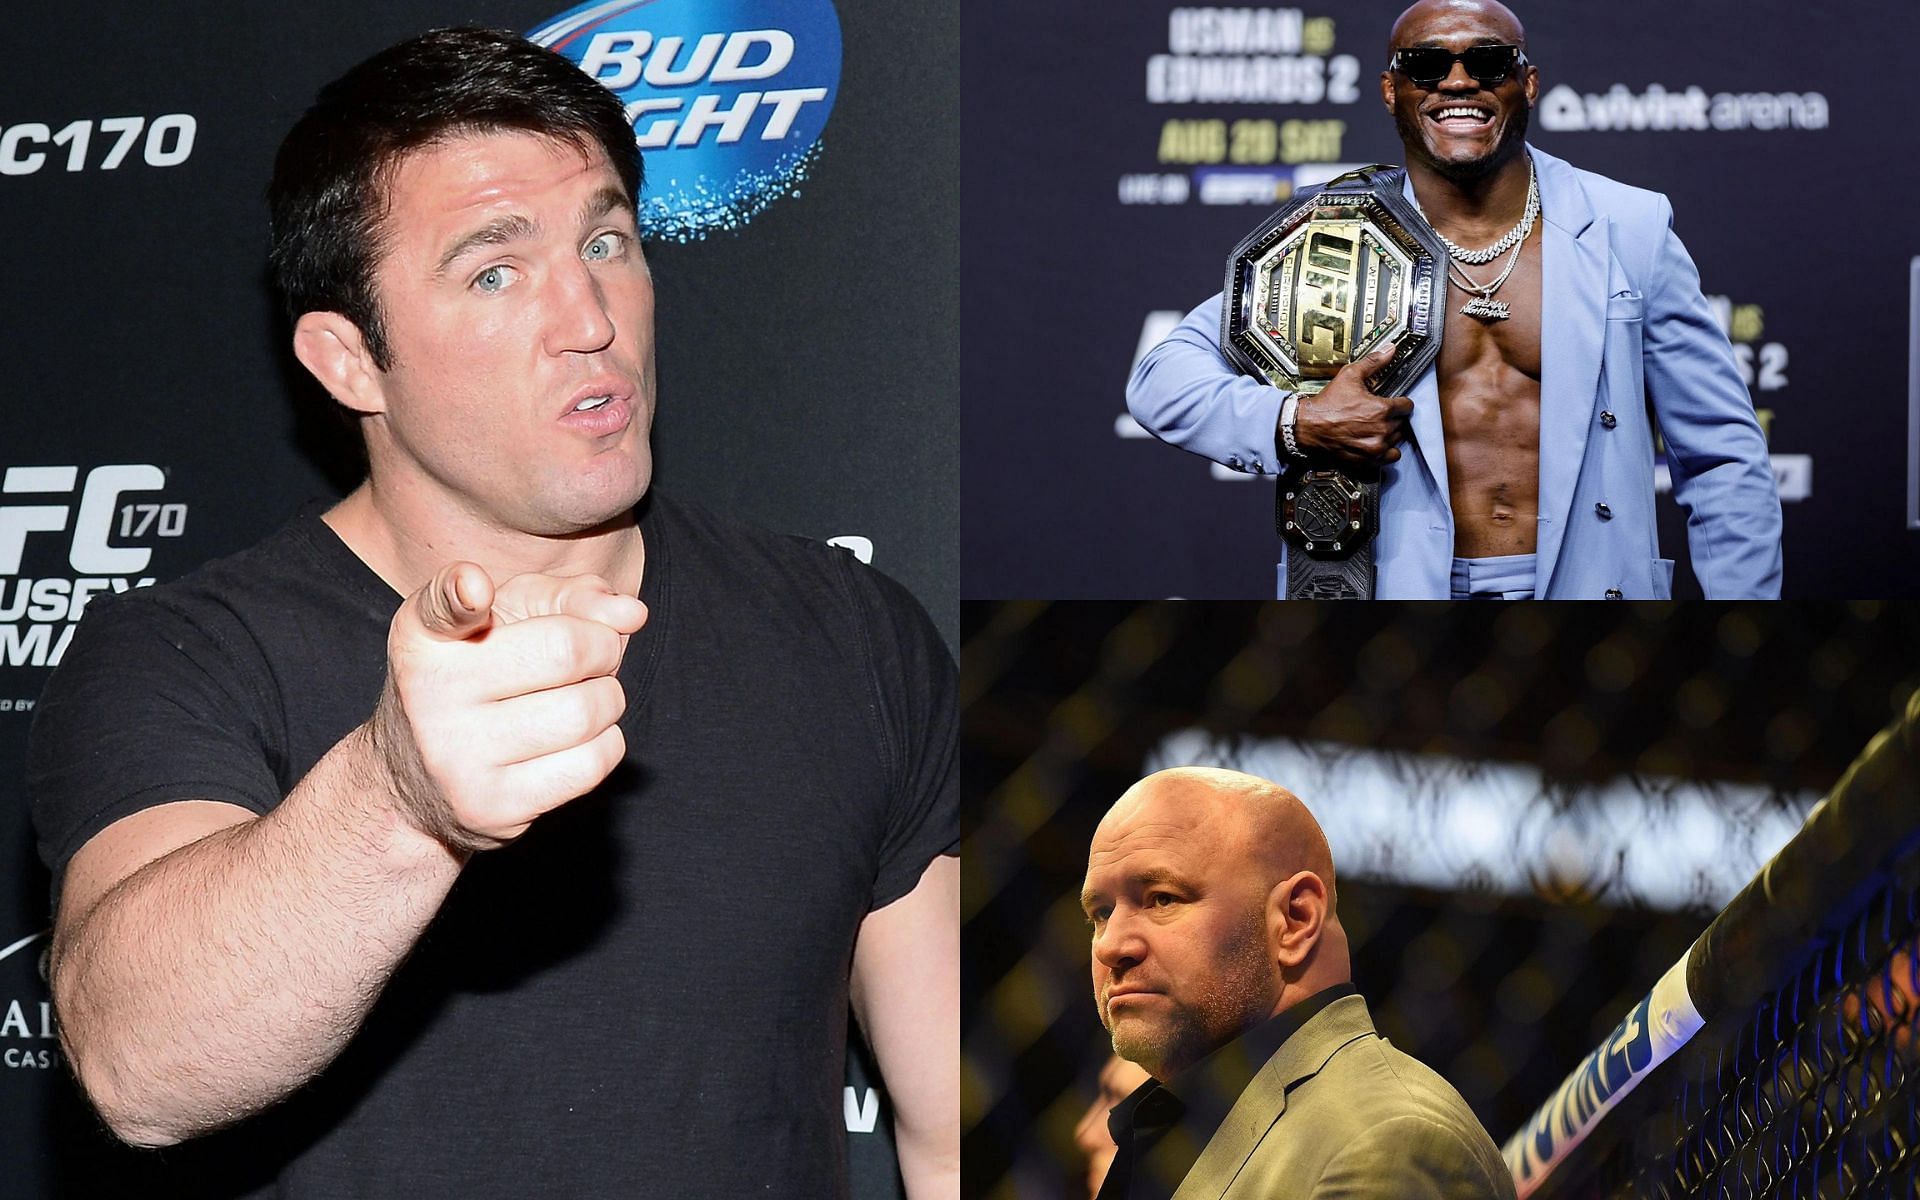 Chael Sonnen (Left), Kamaru Usman (Top Right), and Dana White (Bottom Right) 9Images courtesy of Getty)